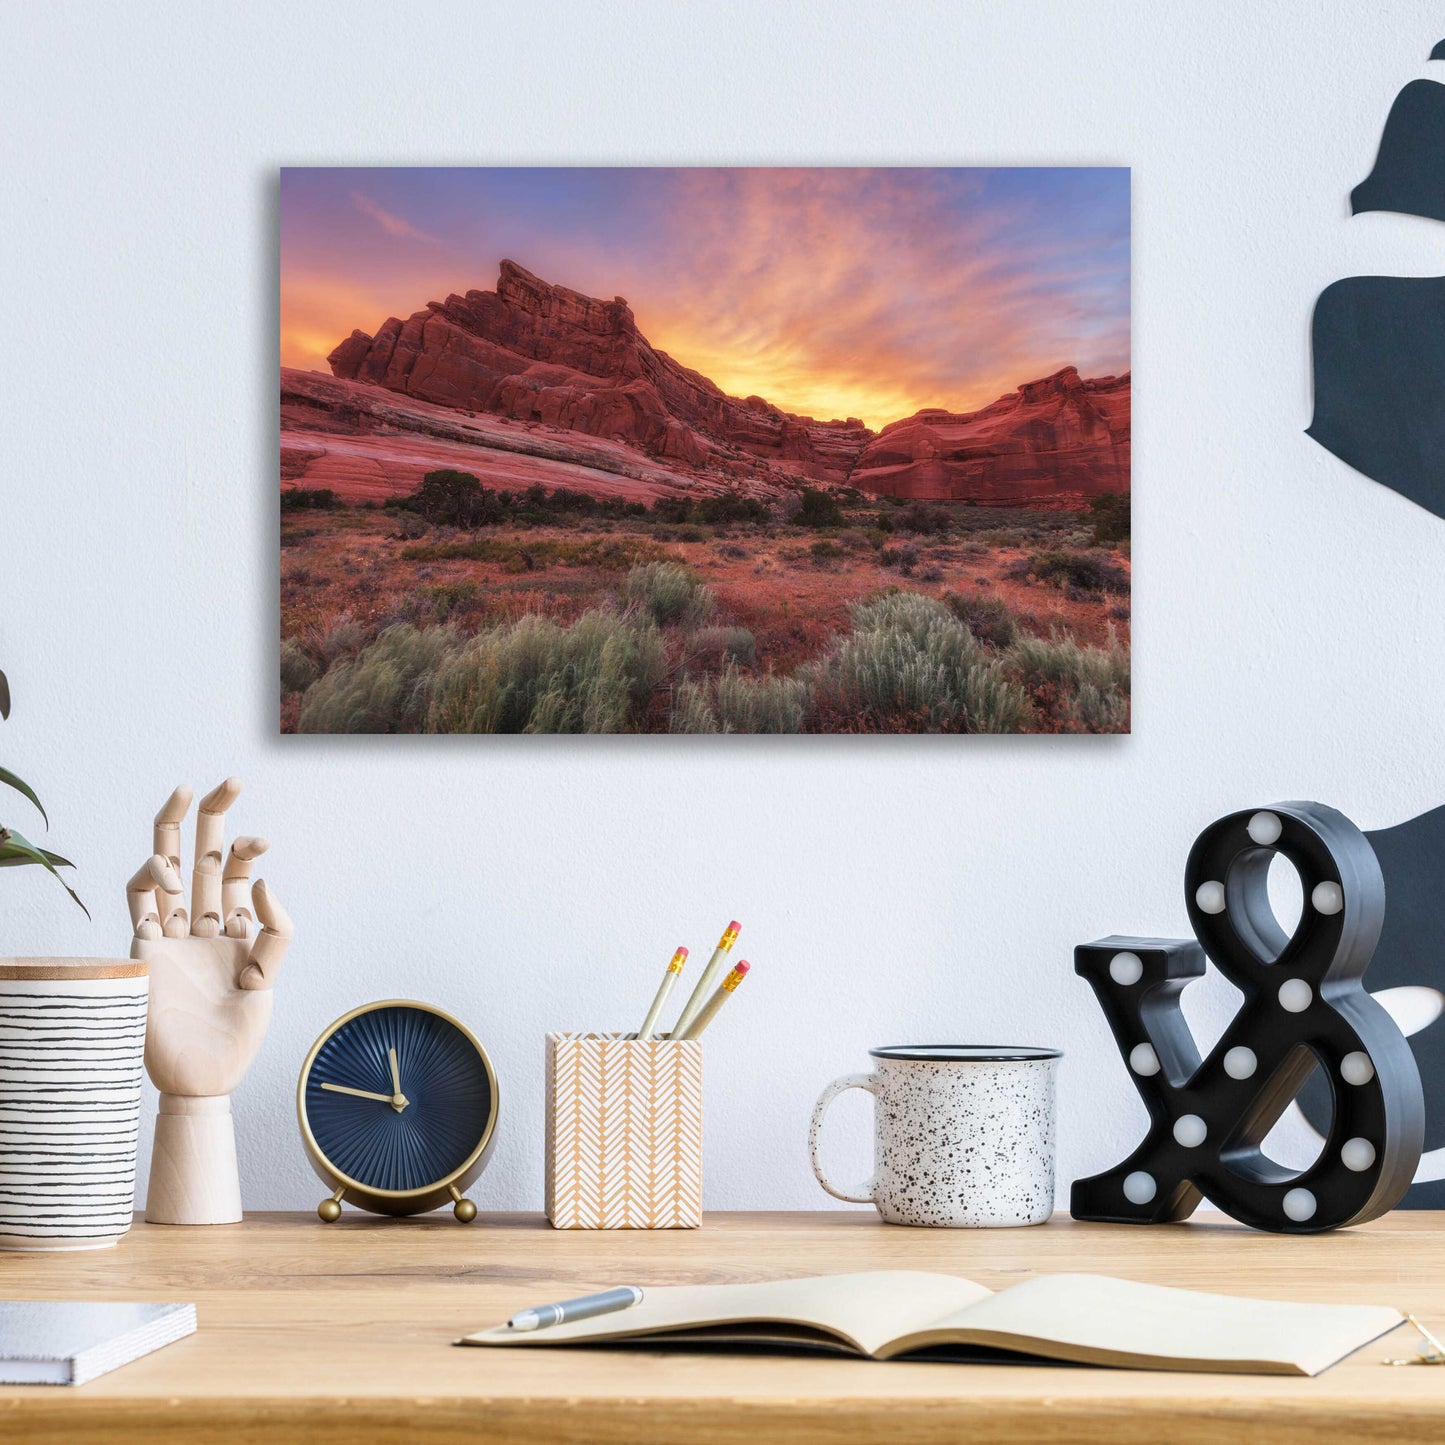 Epic Art 'Arches Sky Fire - Arches National Park' by Darren White, Acrylic Glass Wall Art,16x12